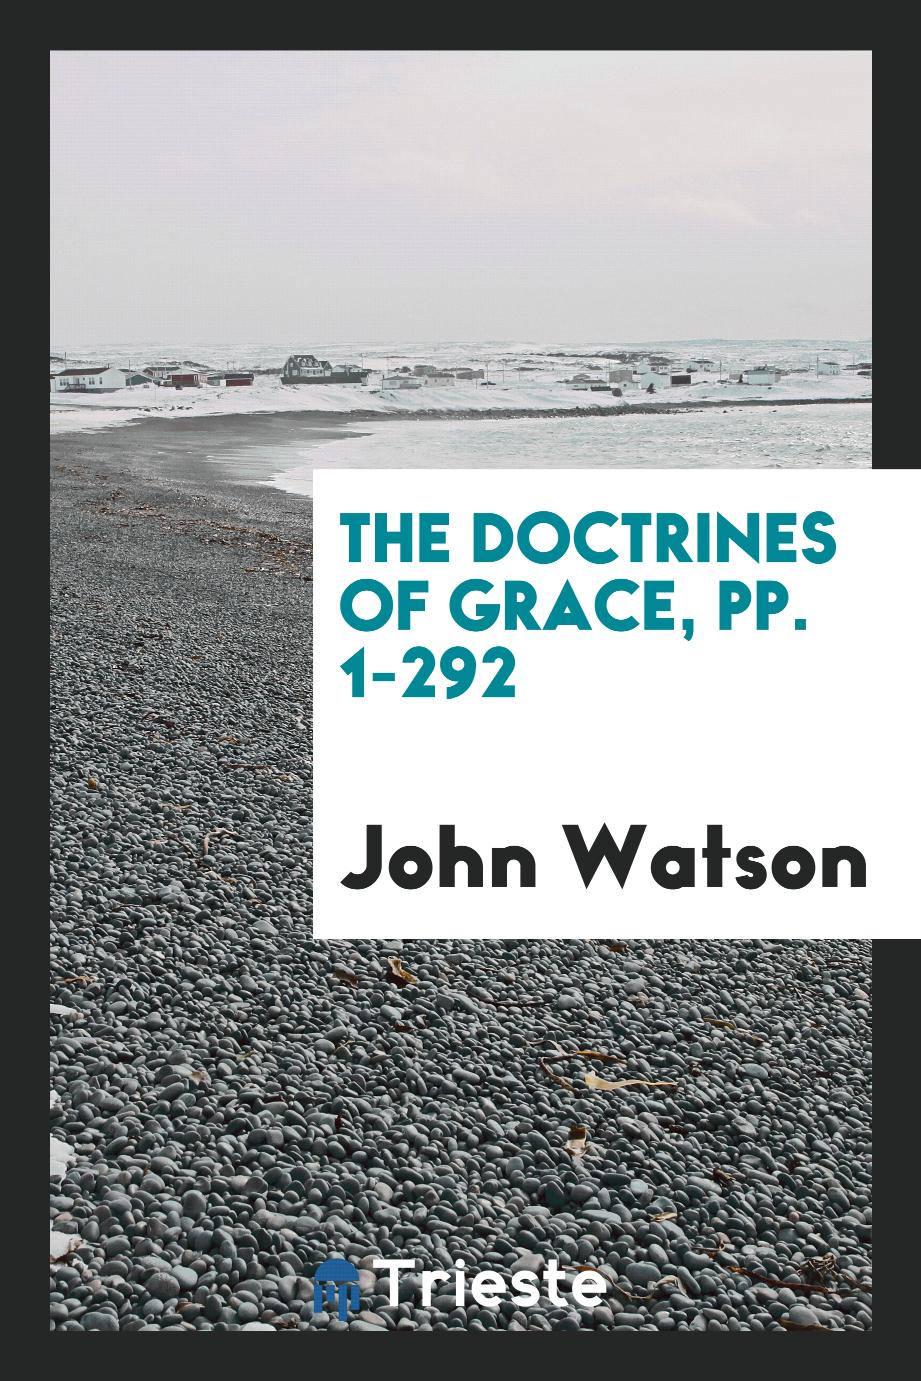 The Doctrines of Grace, pp. 1-292